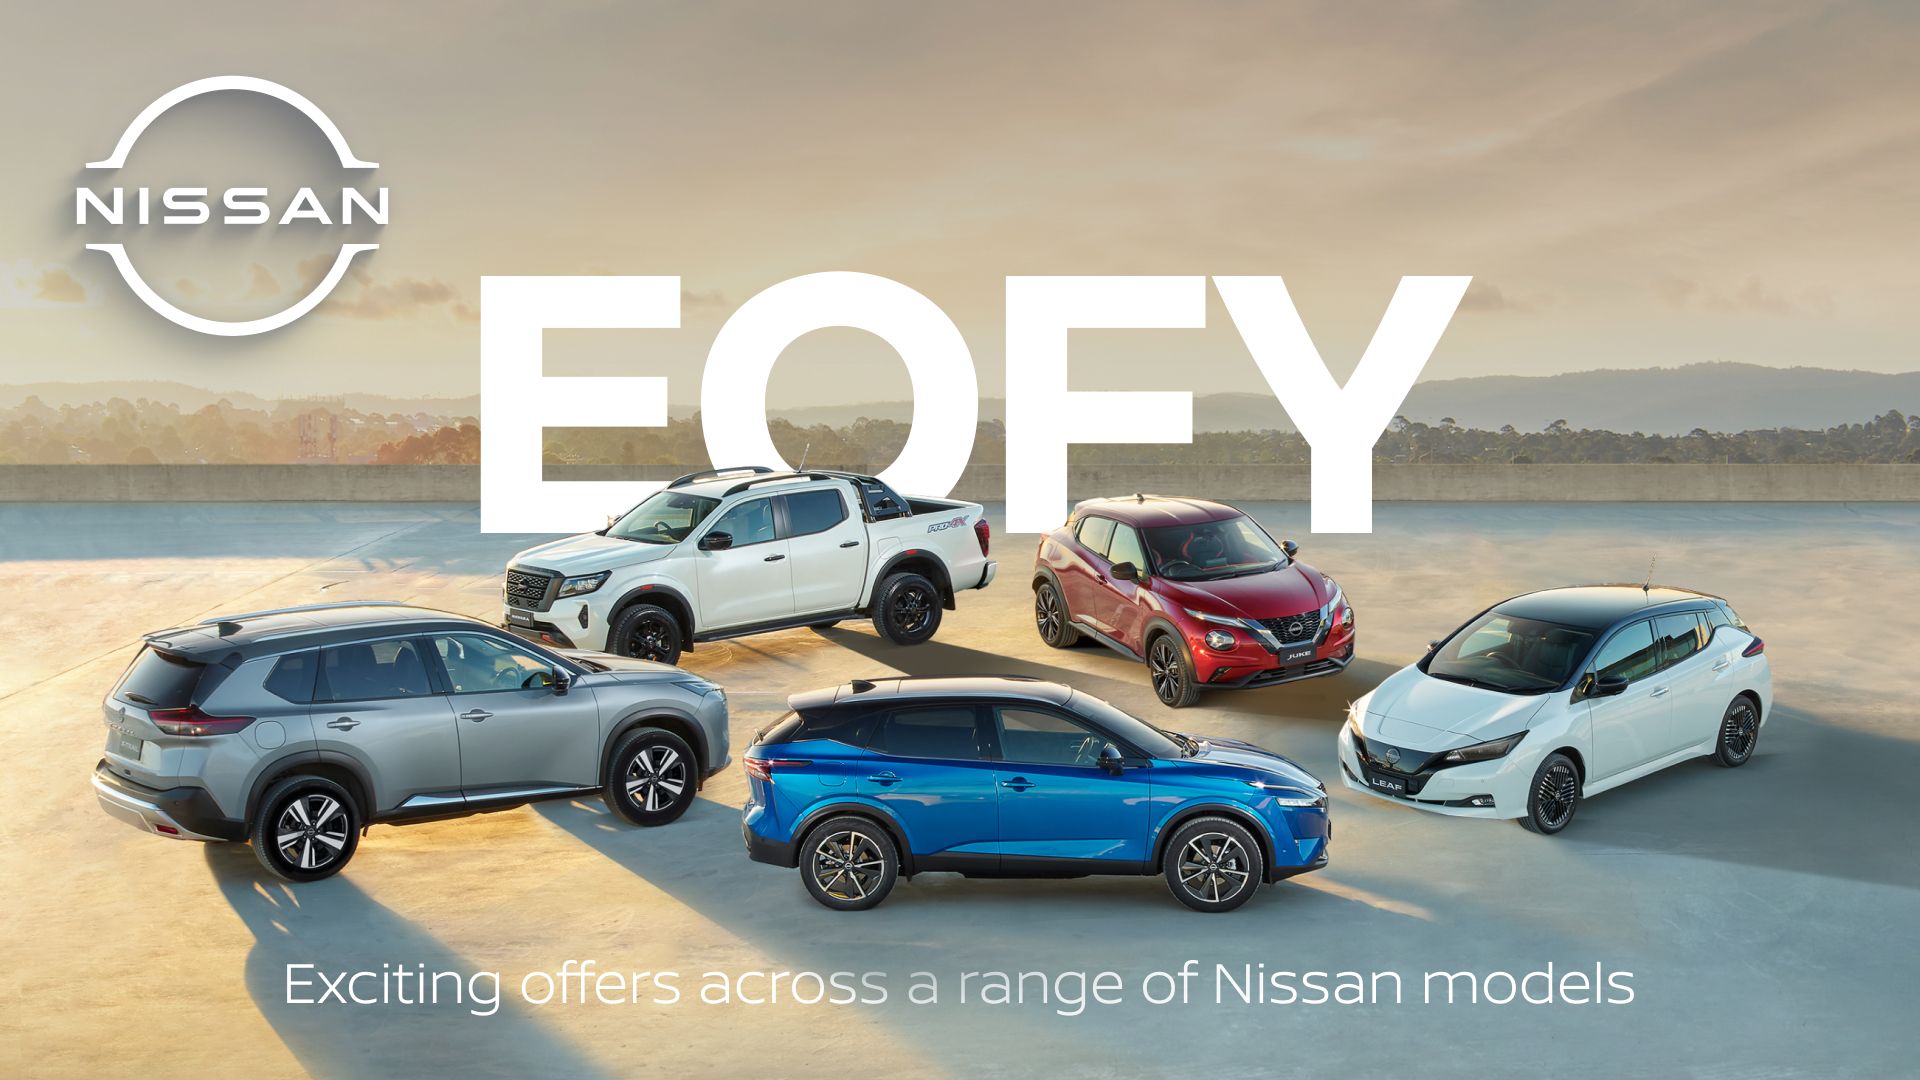 EOFY Exciting offers across a range of Nissan models